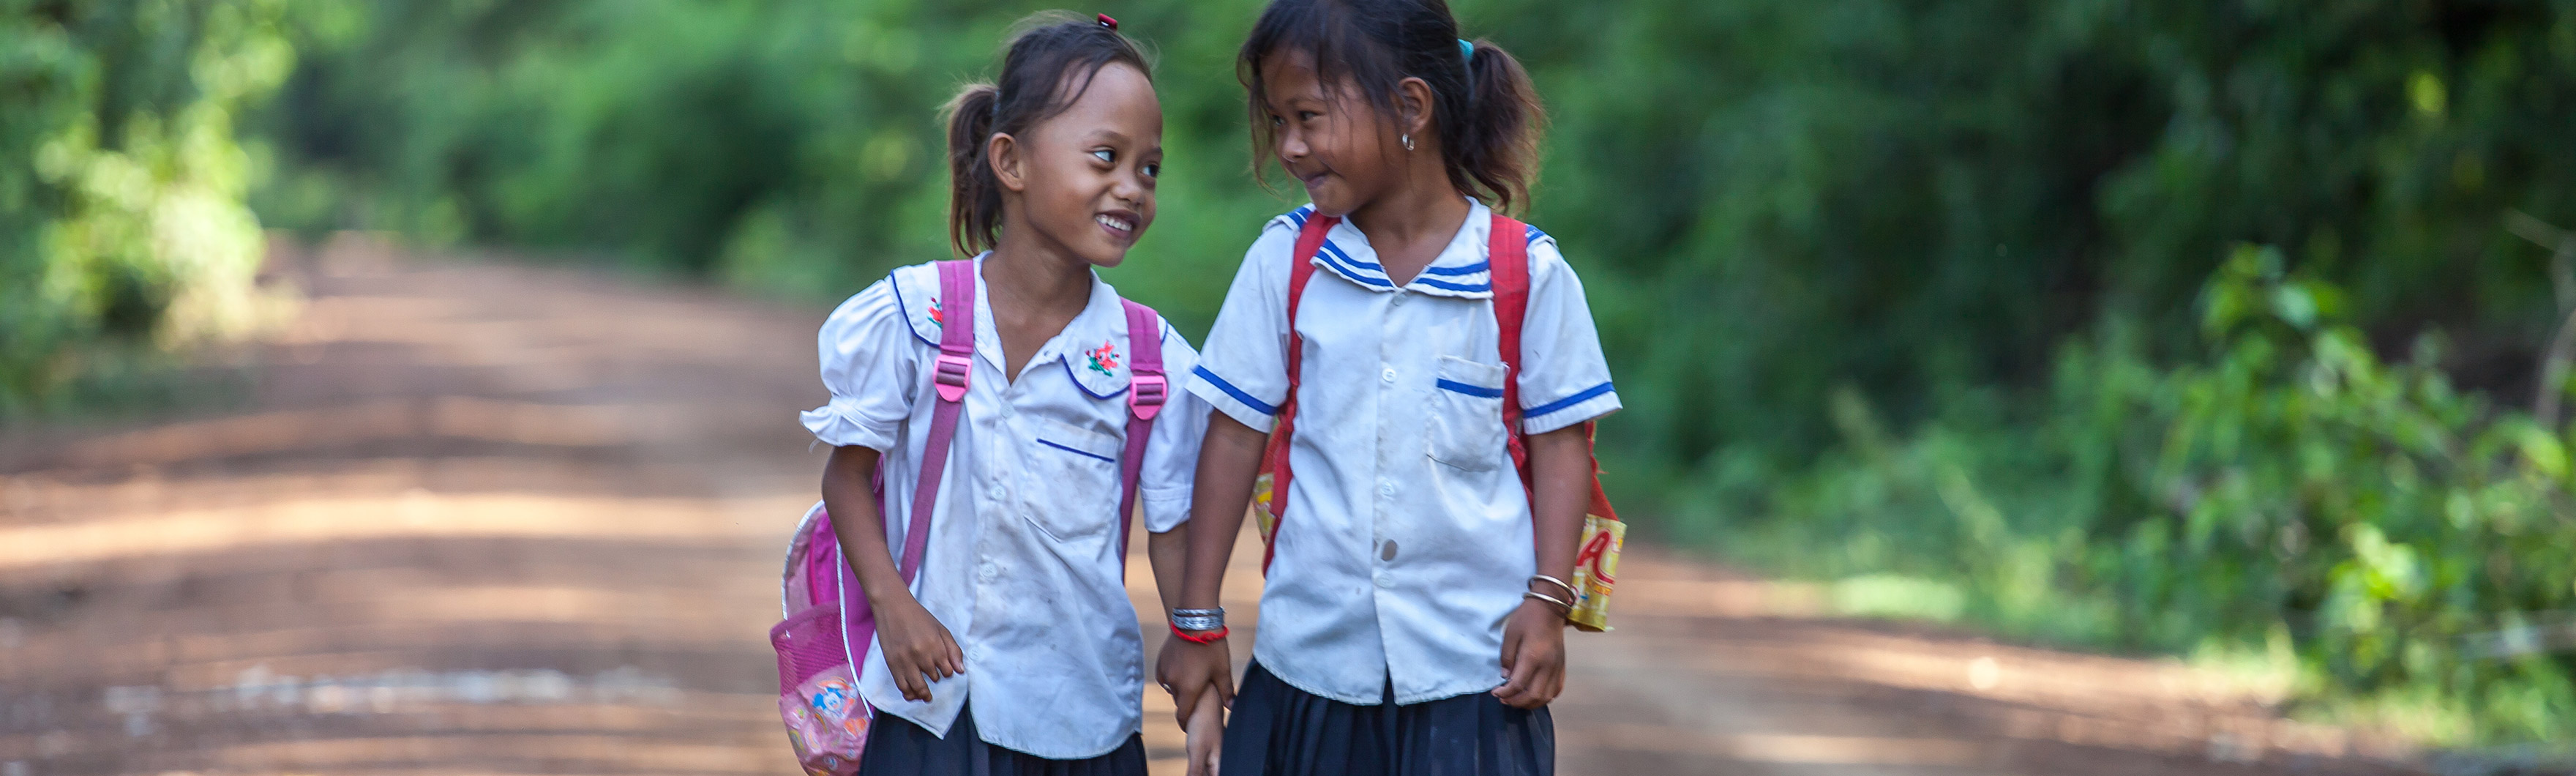 Cambodia, Kampong Champ, Channa, amputated and fitted with a prosthesis by HI, here on her way to school with a friend.